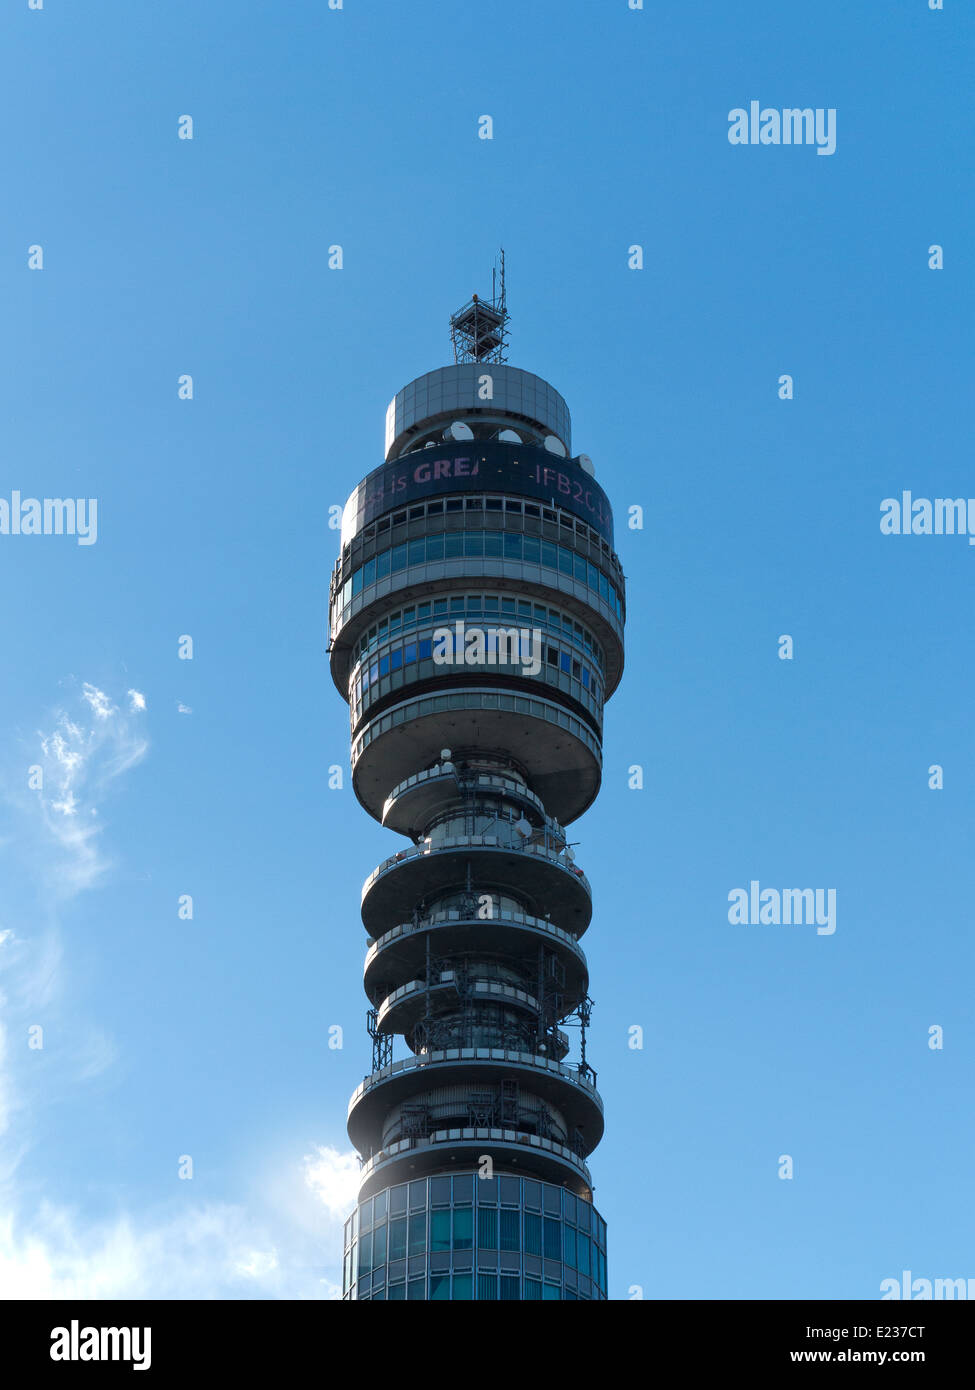 The top section of Telecom Tower against a blue sky with white clouds Stock Photo